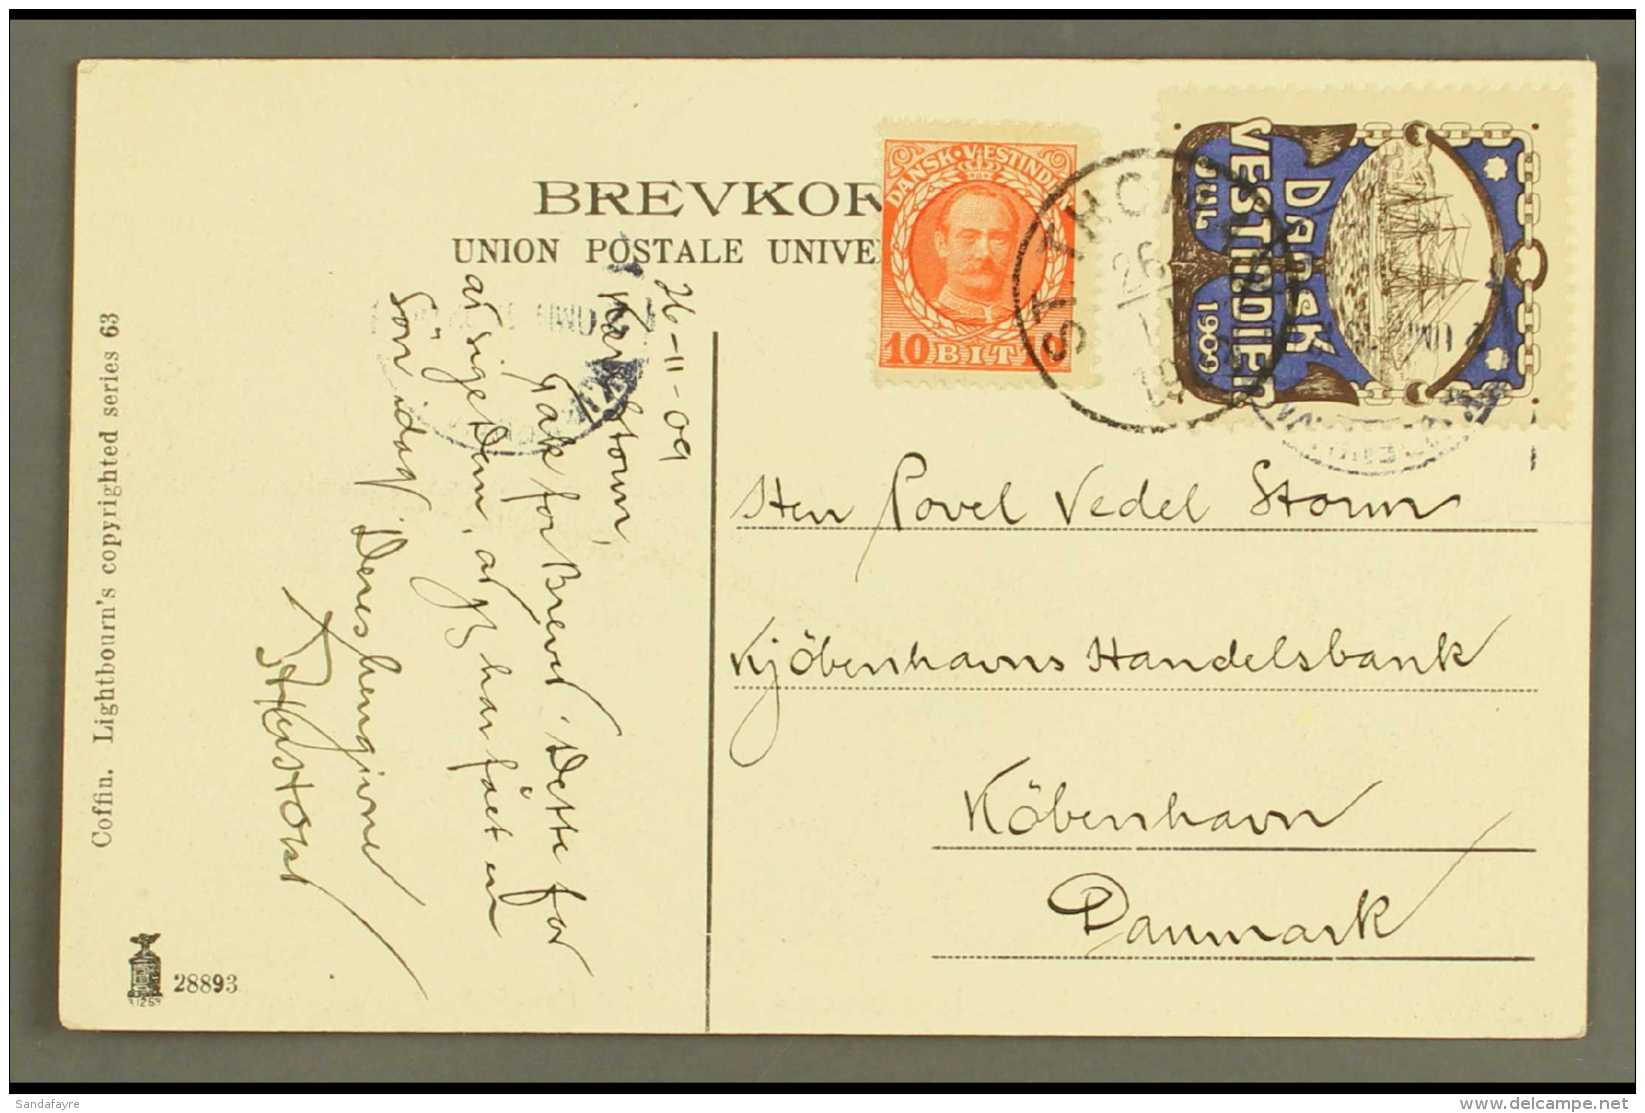 1909 CHRISTMAS SEAL ON POSTCARD. Picture Postcard Showing St Thomas, Addressed To Denmark, Bearing 10b Stamp And... - Dänisch-Westindien